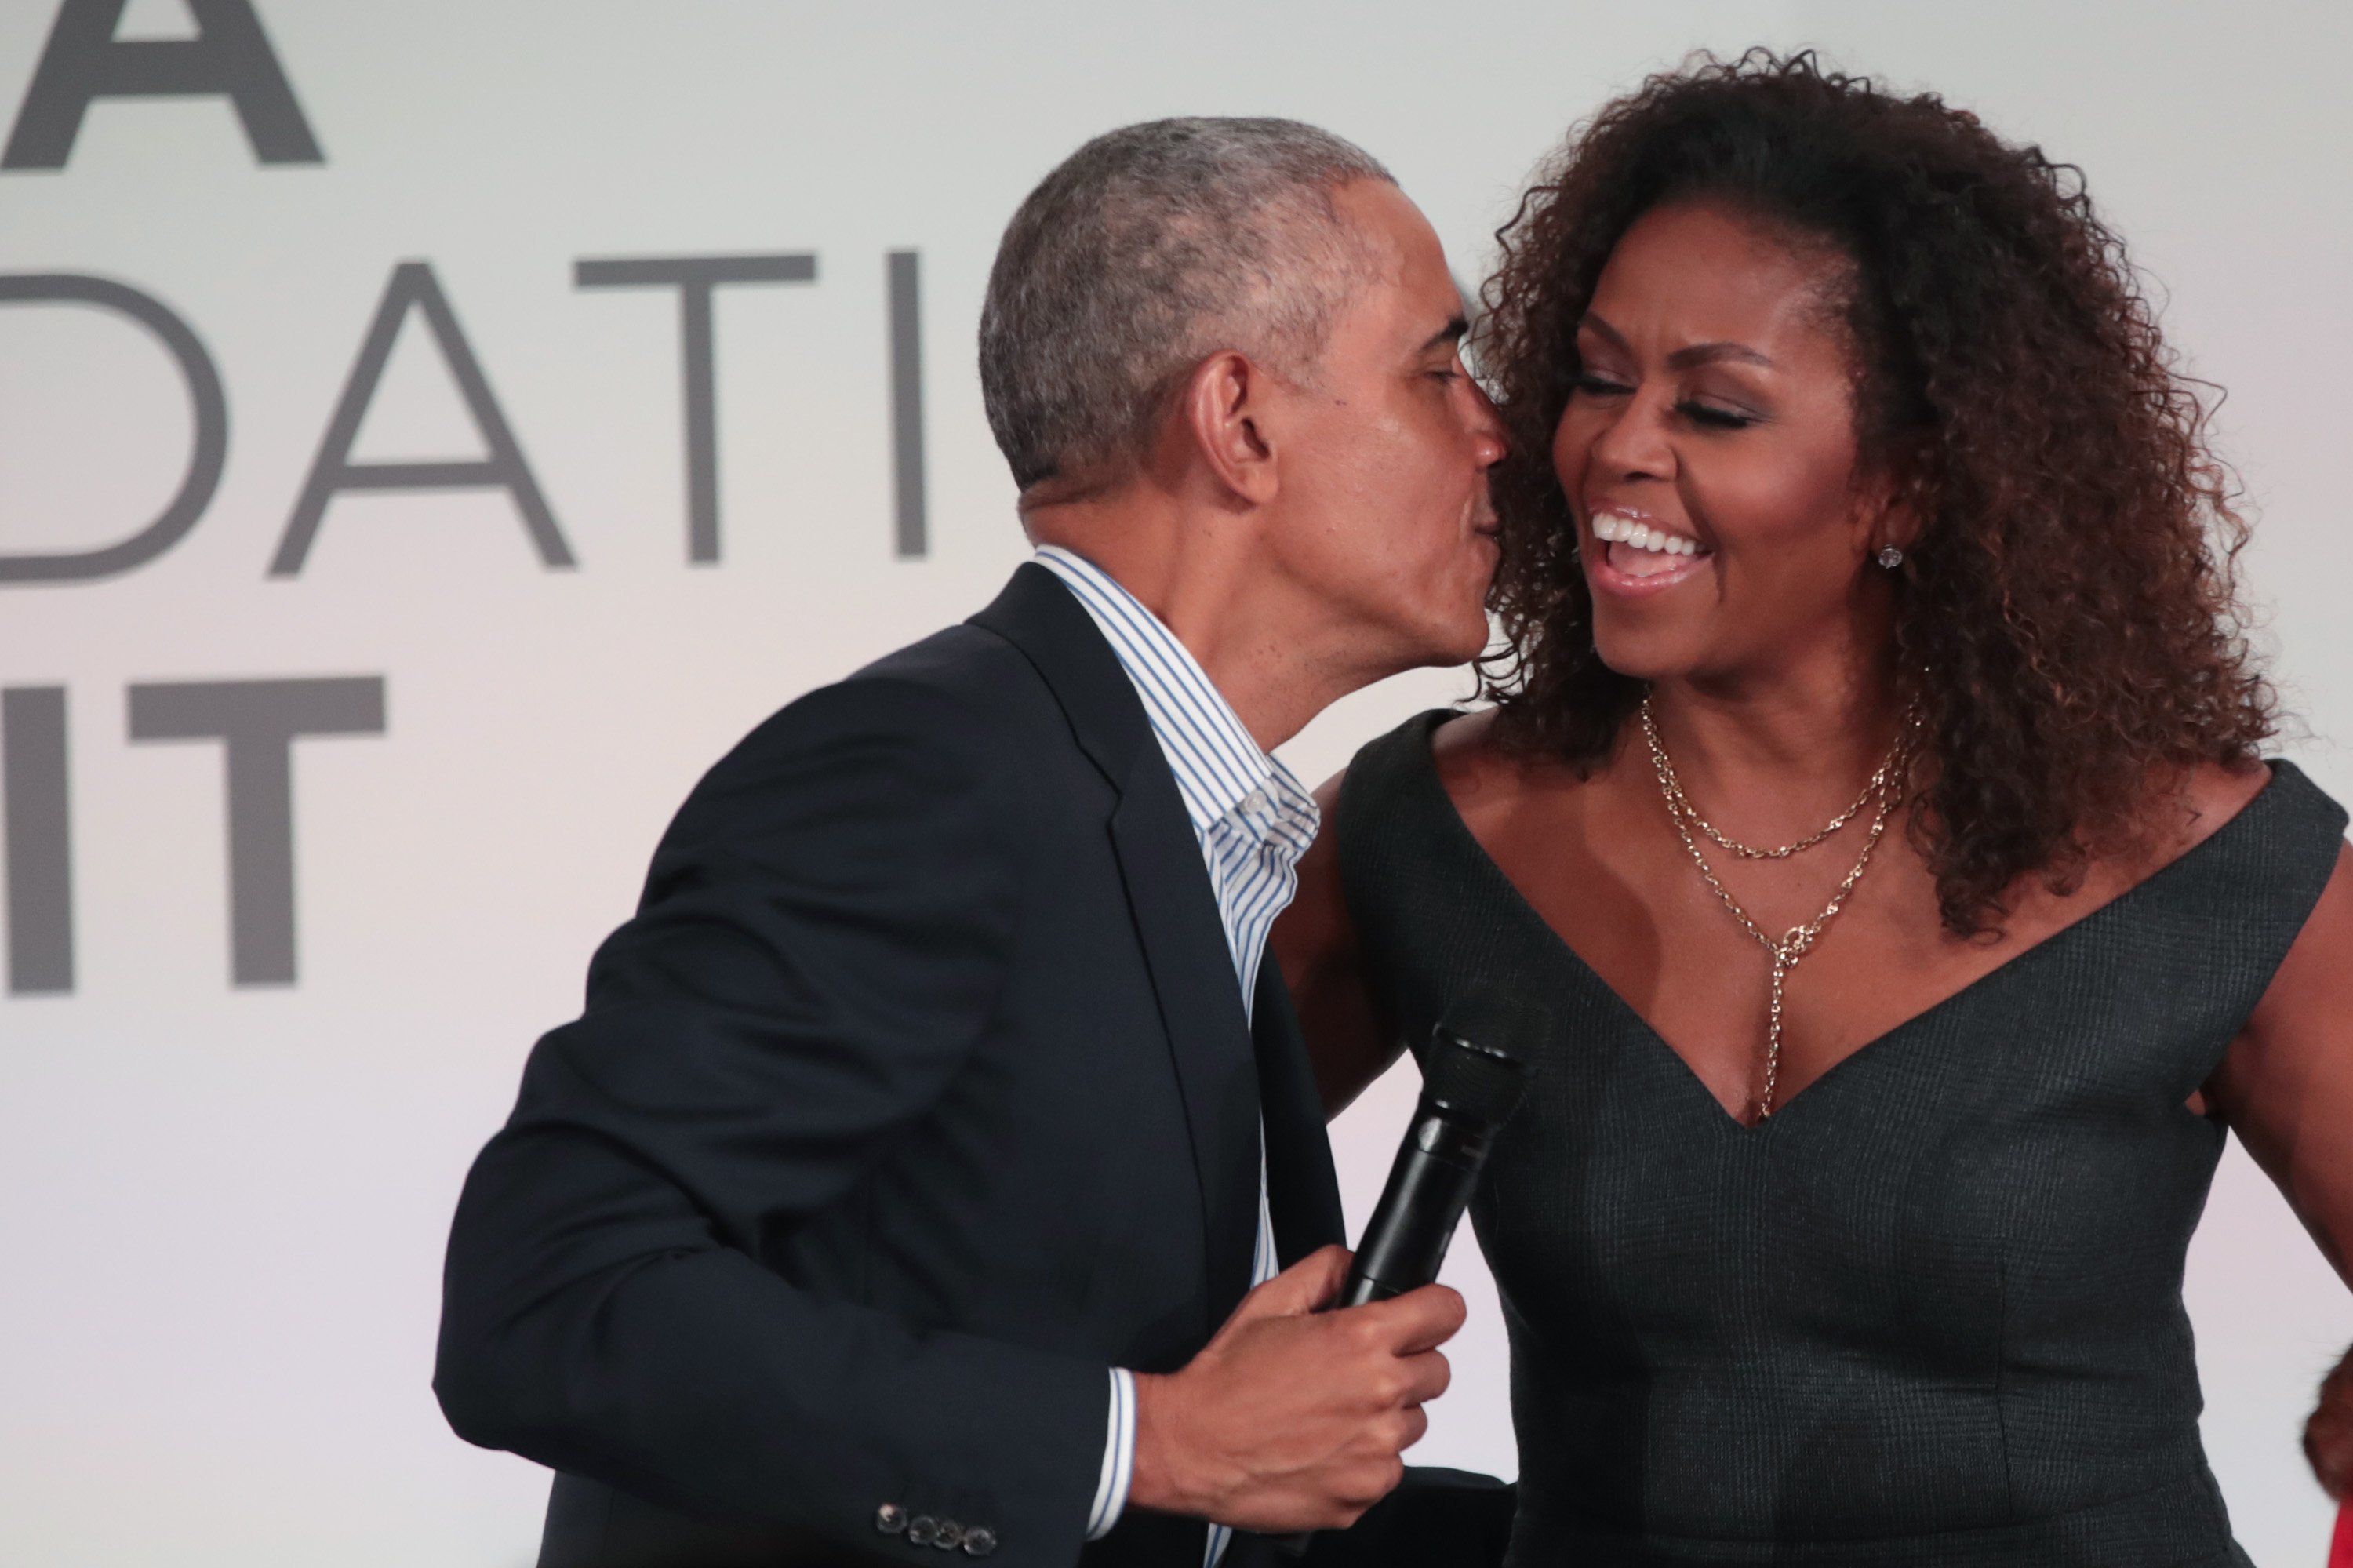 Barack Obama gives his wife Michelle a kiss as they close the Obama Foundation Summit together on the campus of the Illinois Institute of Technology on October 29, 2019. | Source: Getty Images